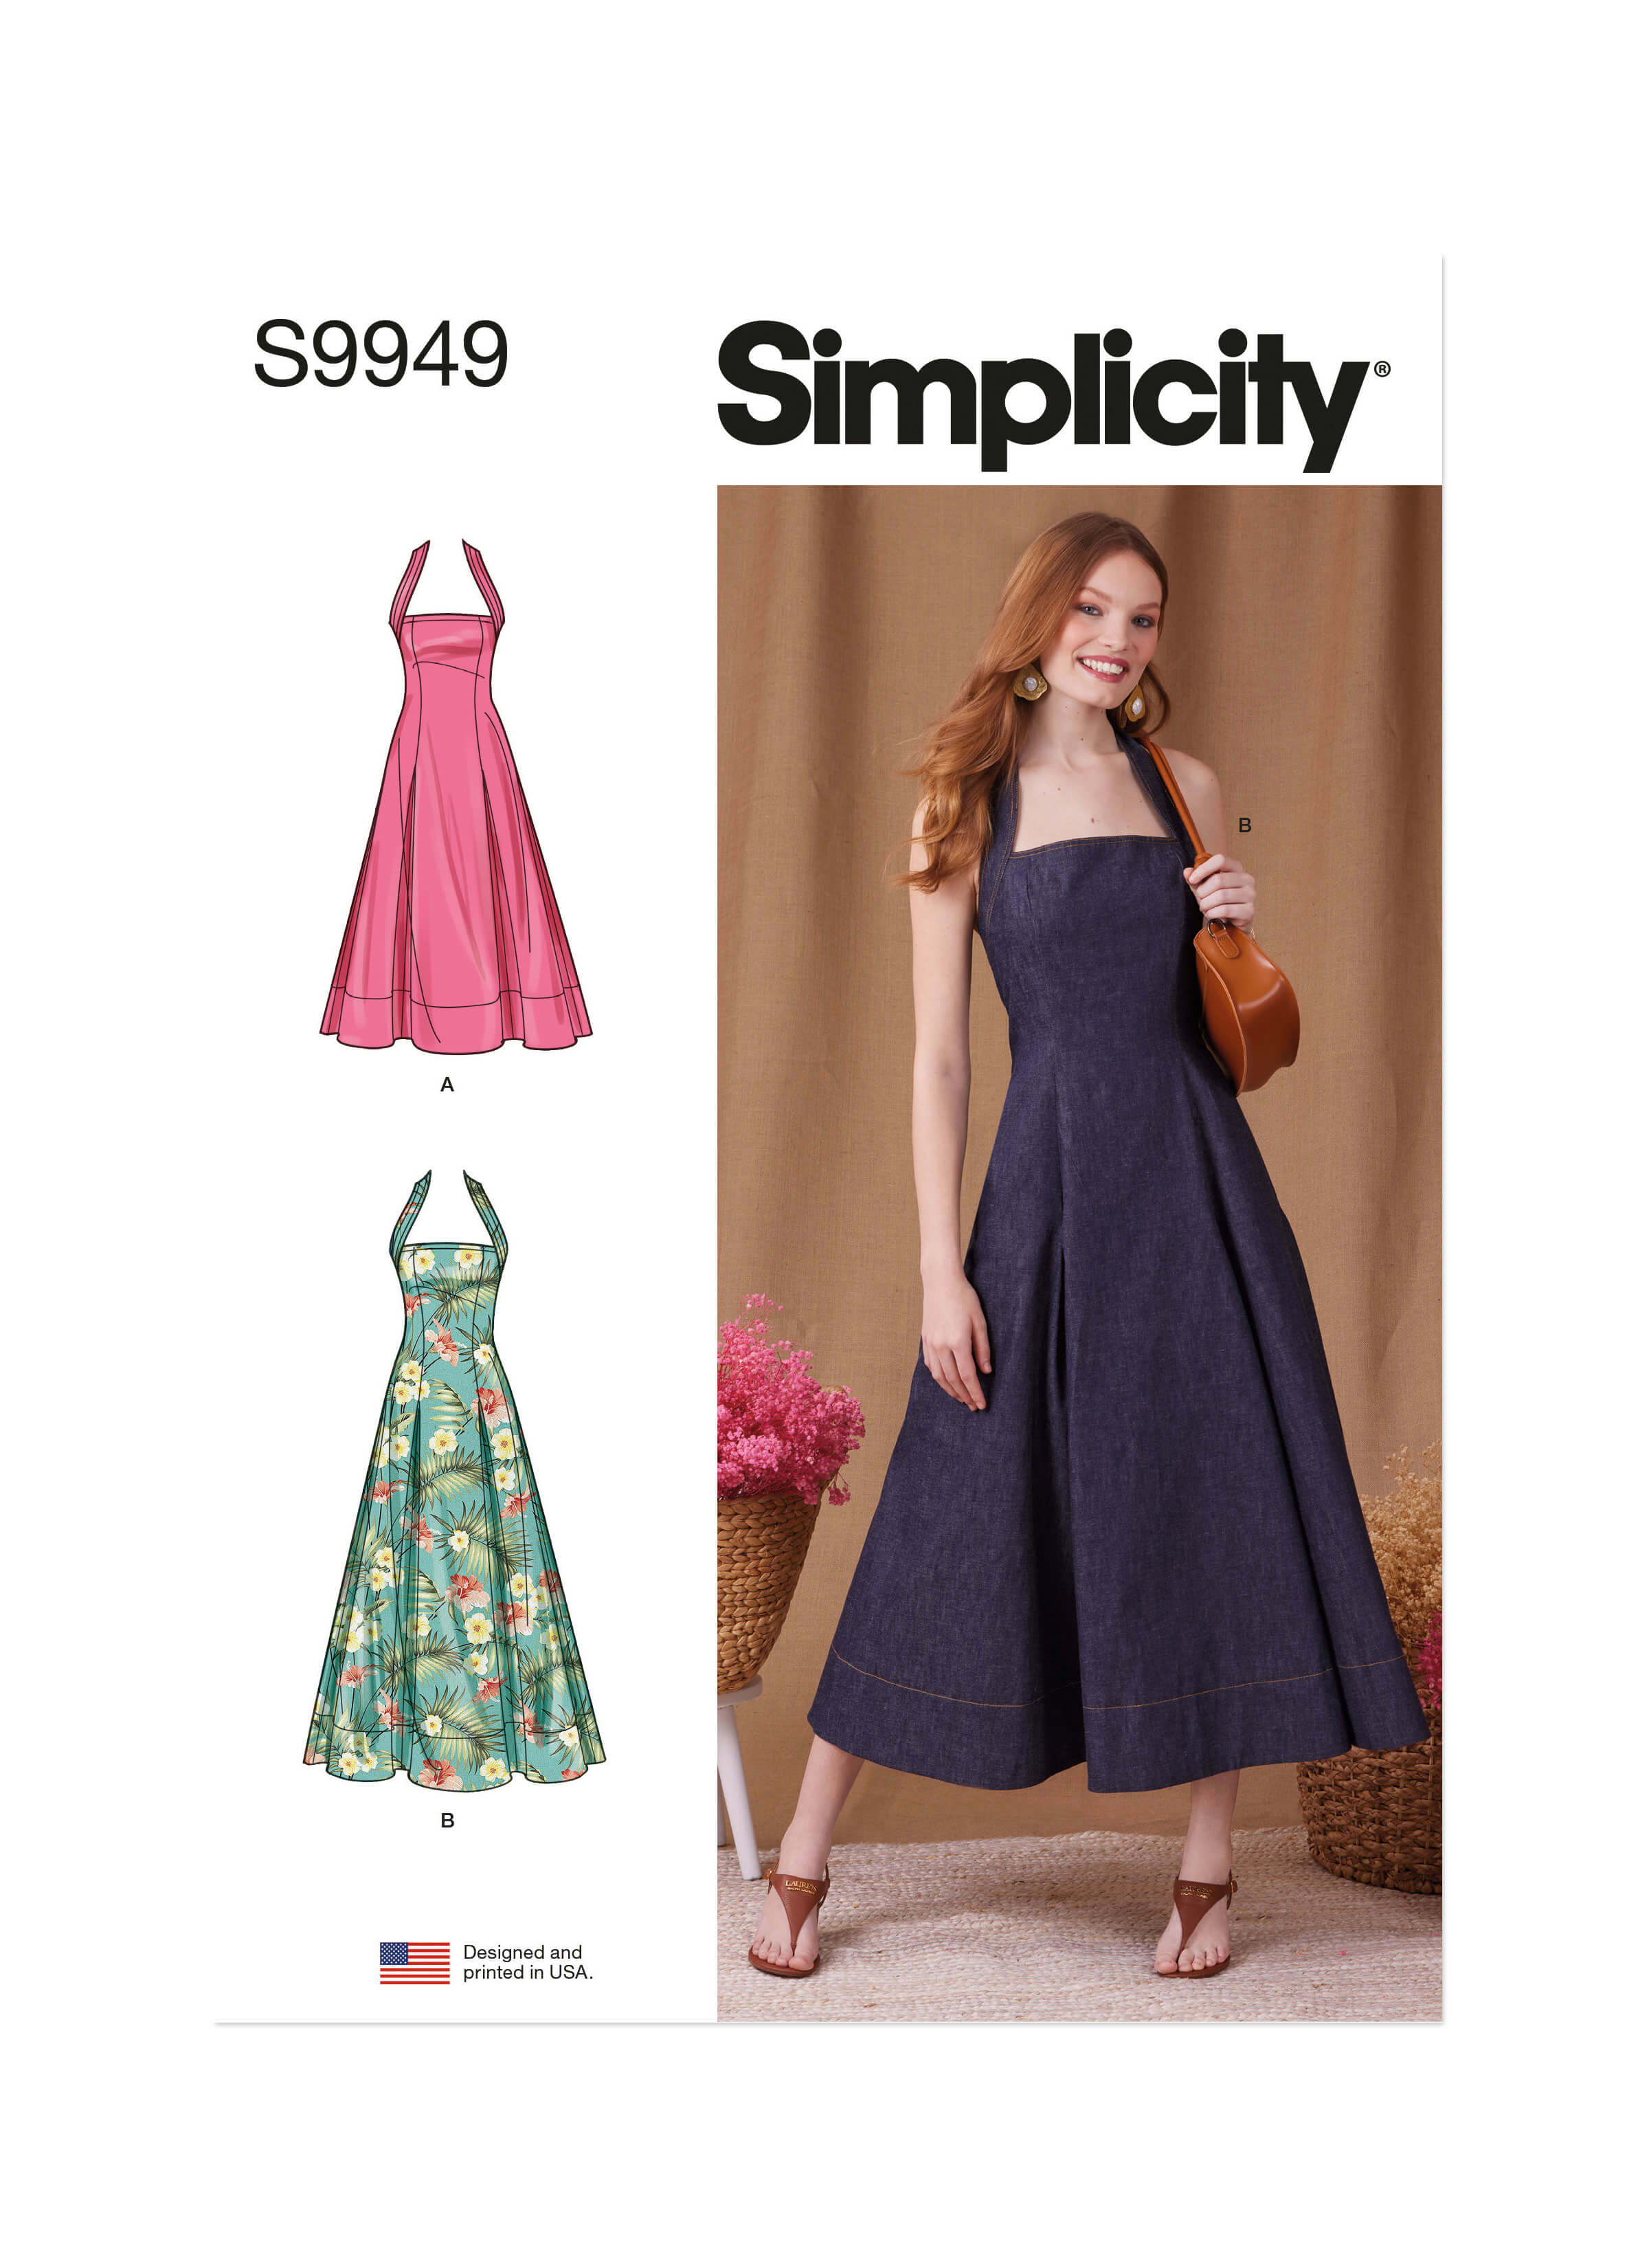 Simplicity Sewing Pattern S9949 Misses' Dress in Two Lengths